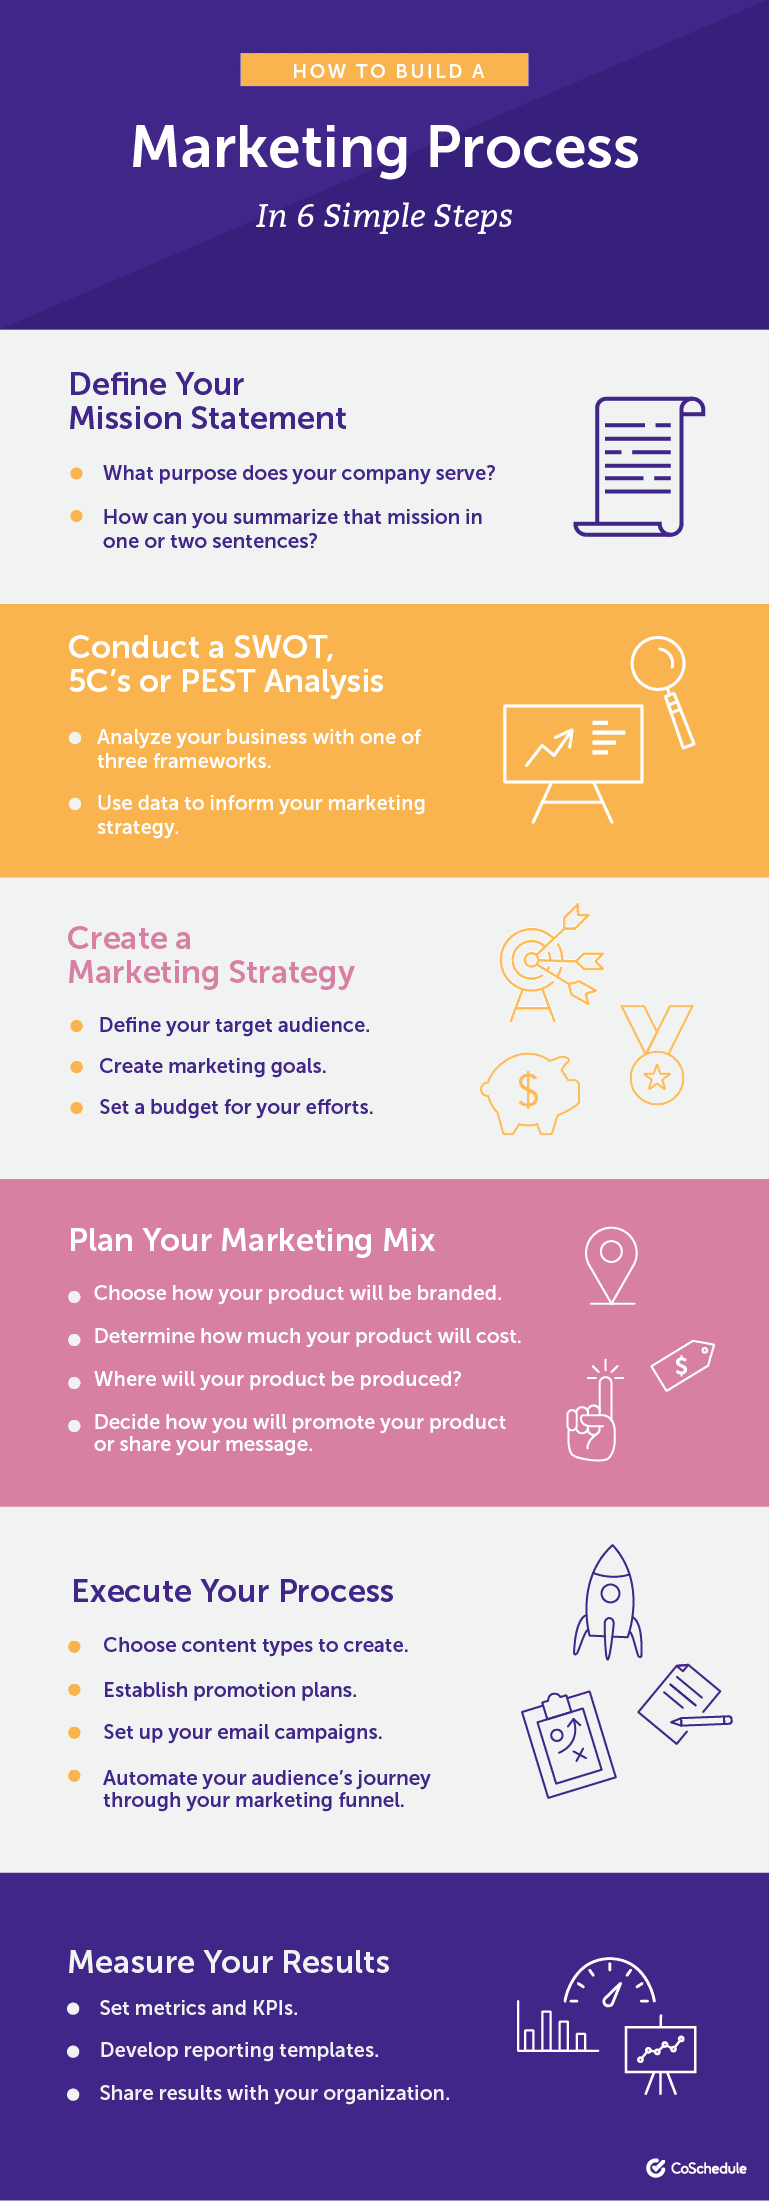 How the Marketing Process Works